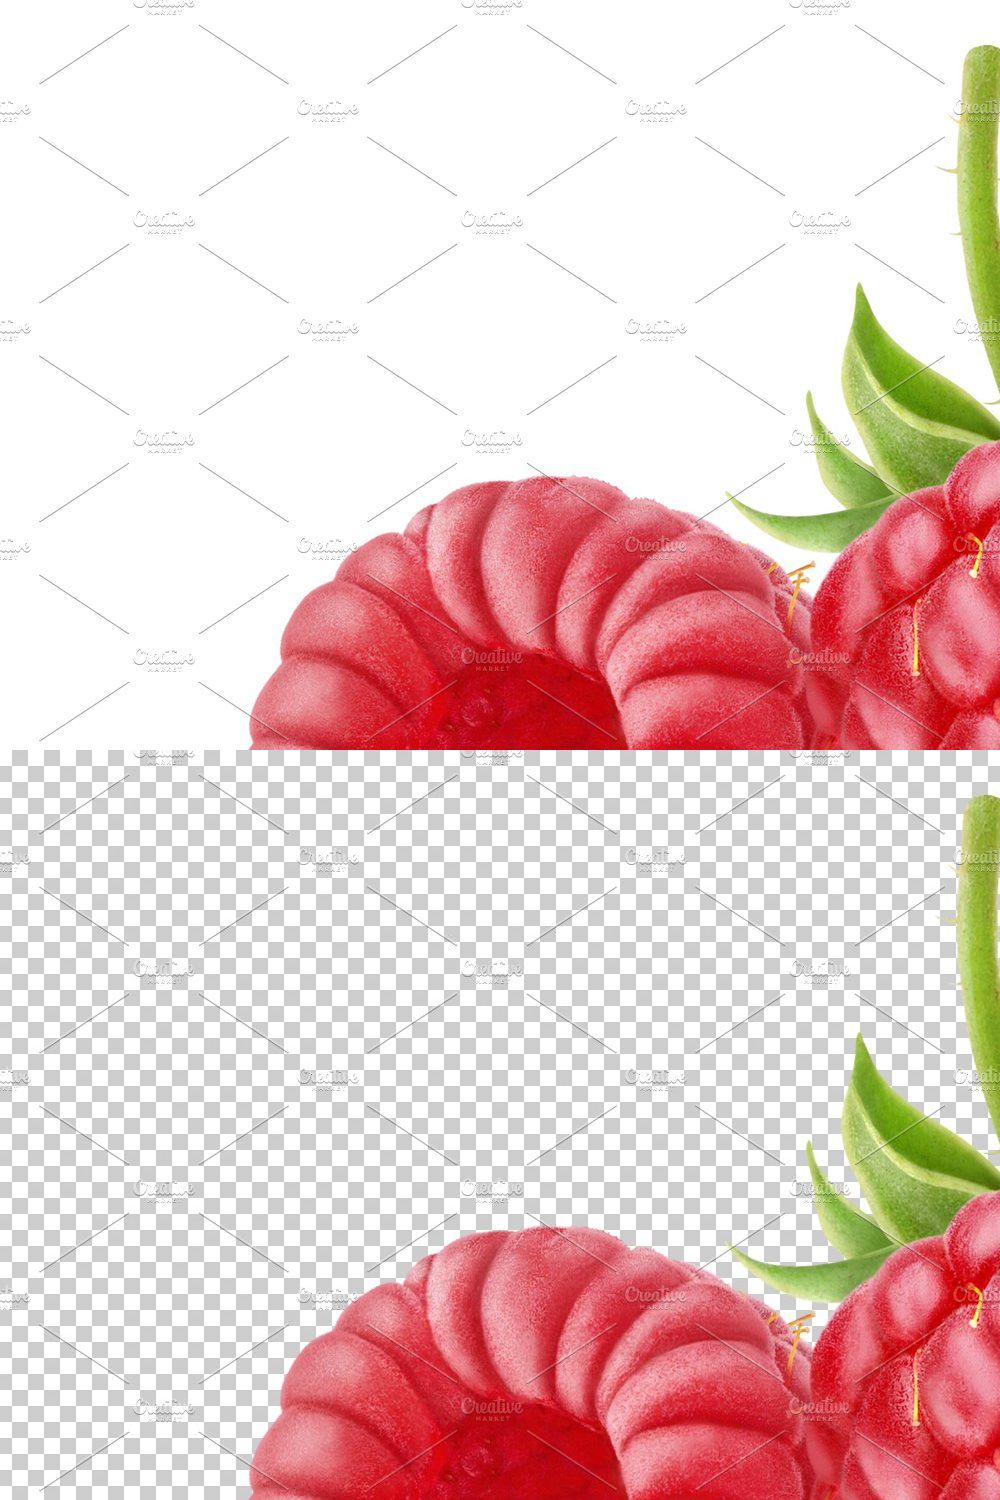 Two raspberries pinterest preview image.